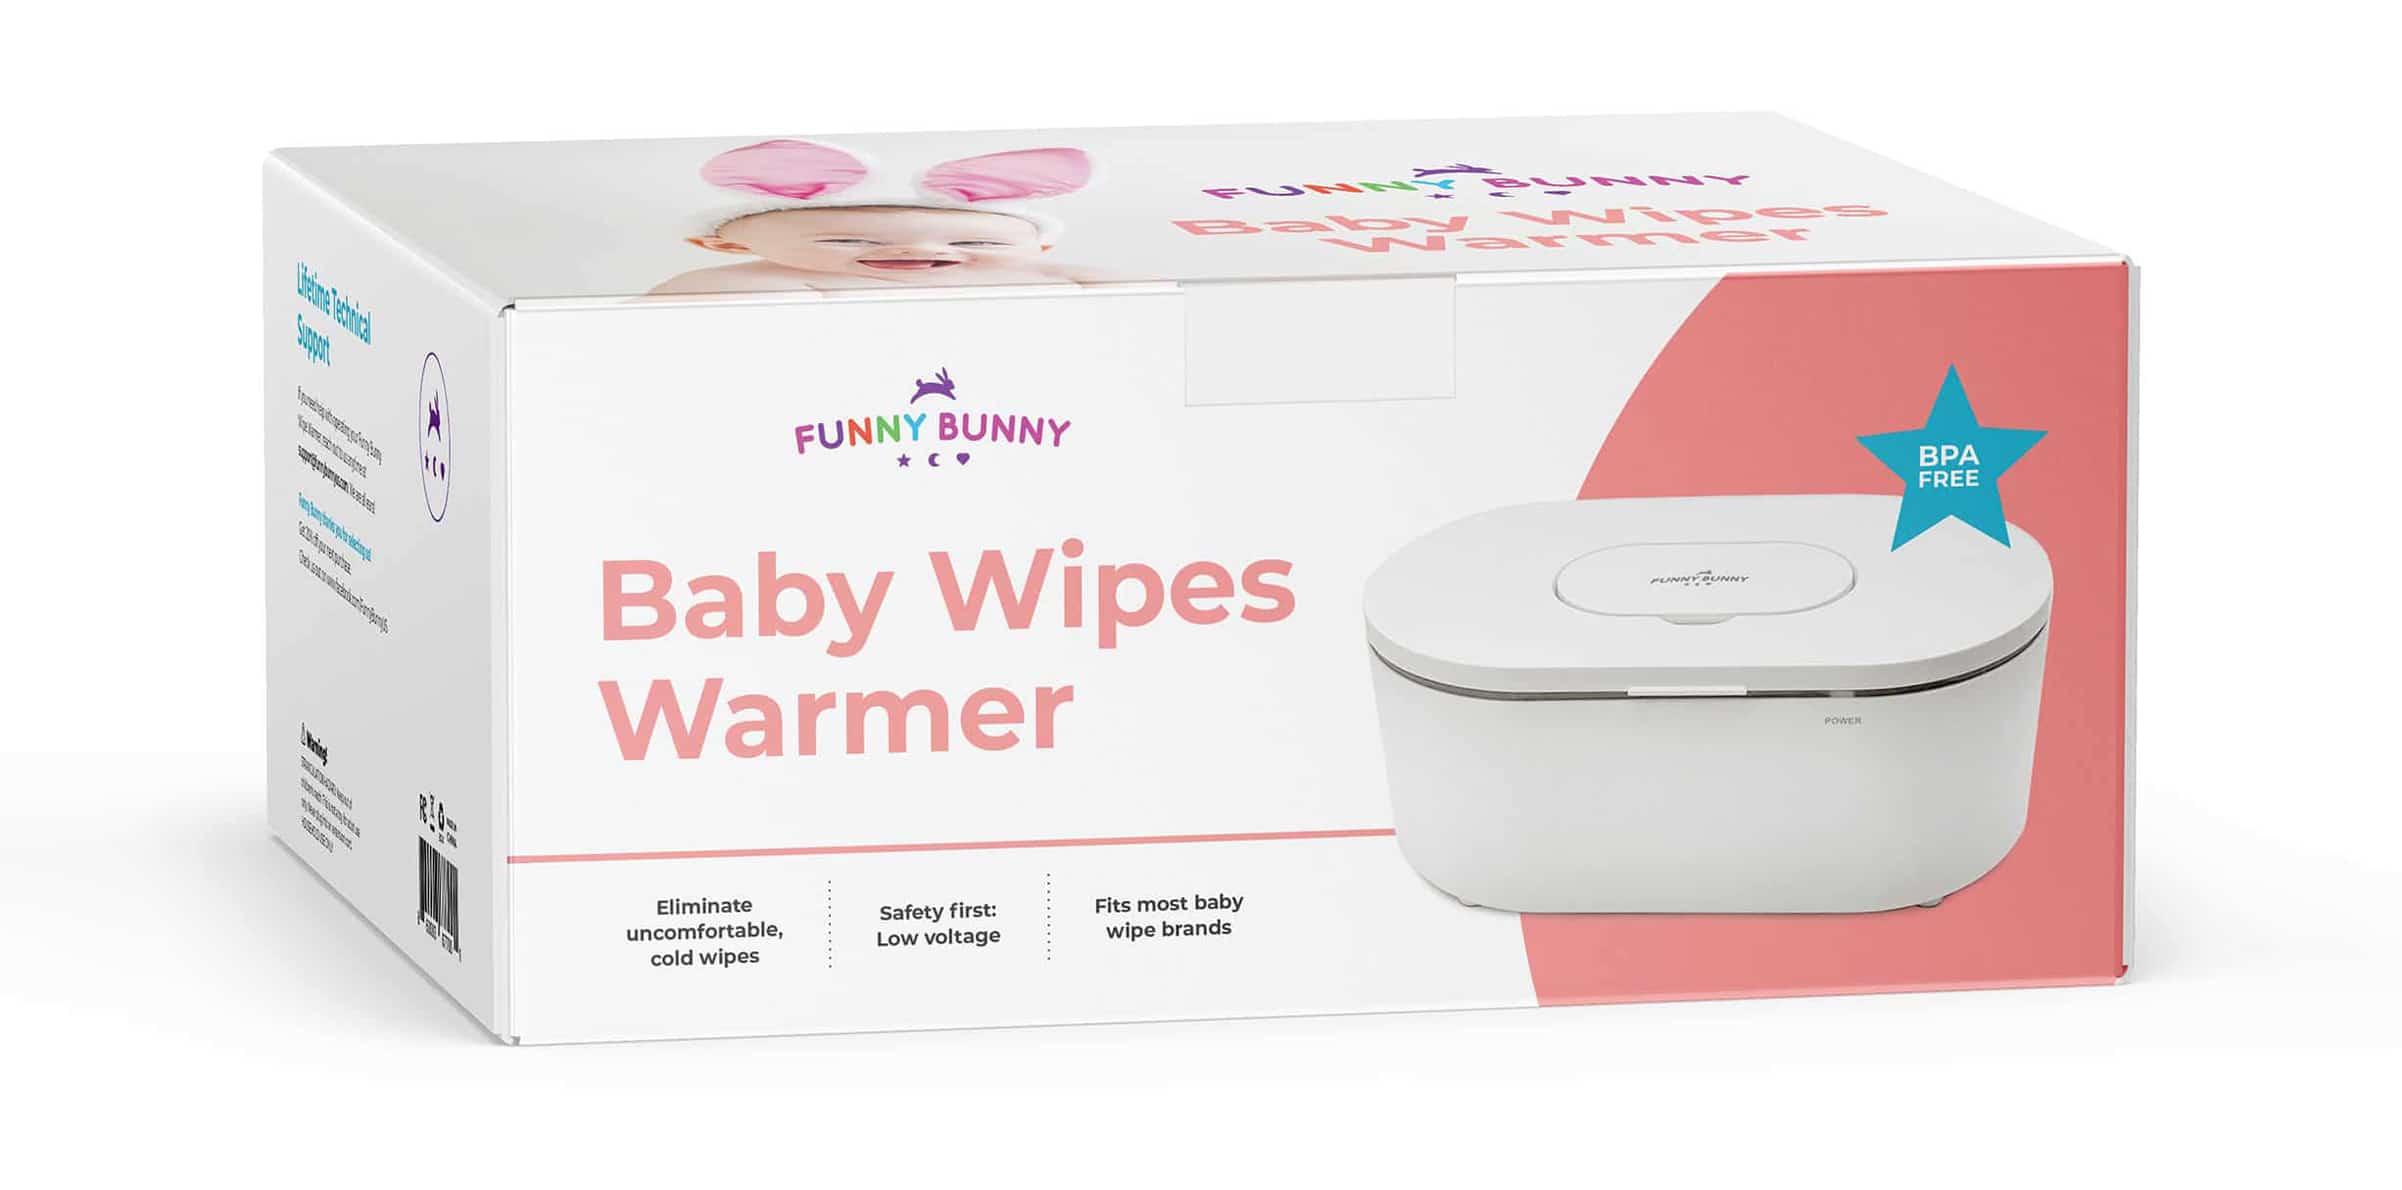 Baby Wipes Packaging Design: Funny Bunny packaging design for baby wipes warmer with retro color palette, logo, and images on box.